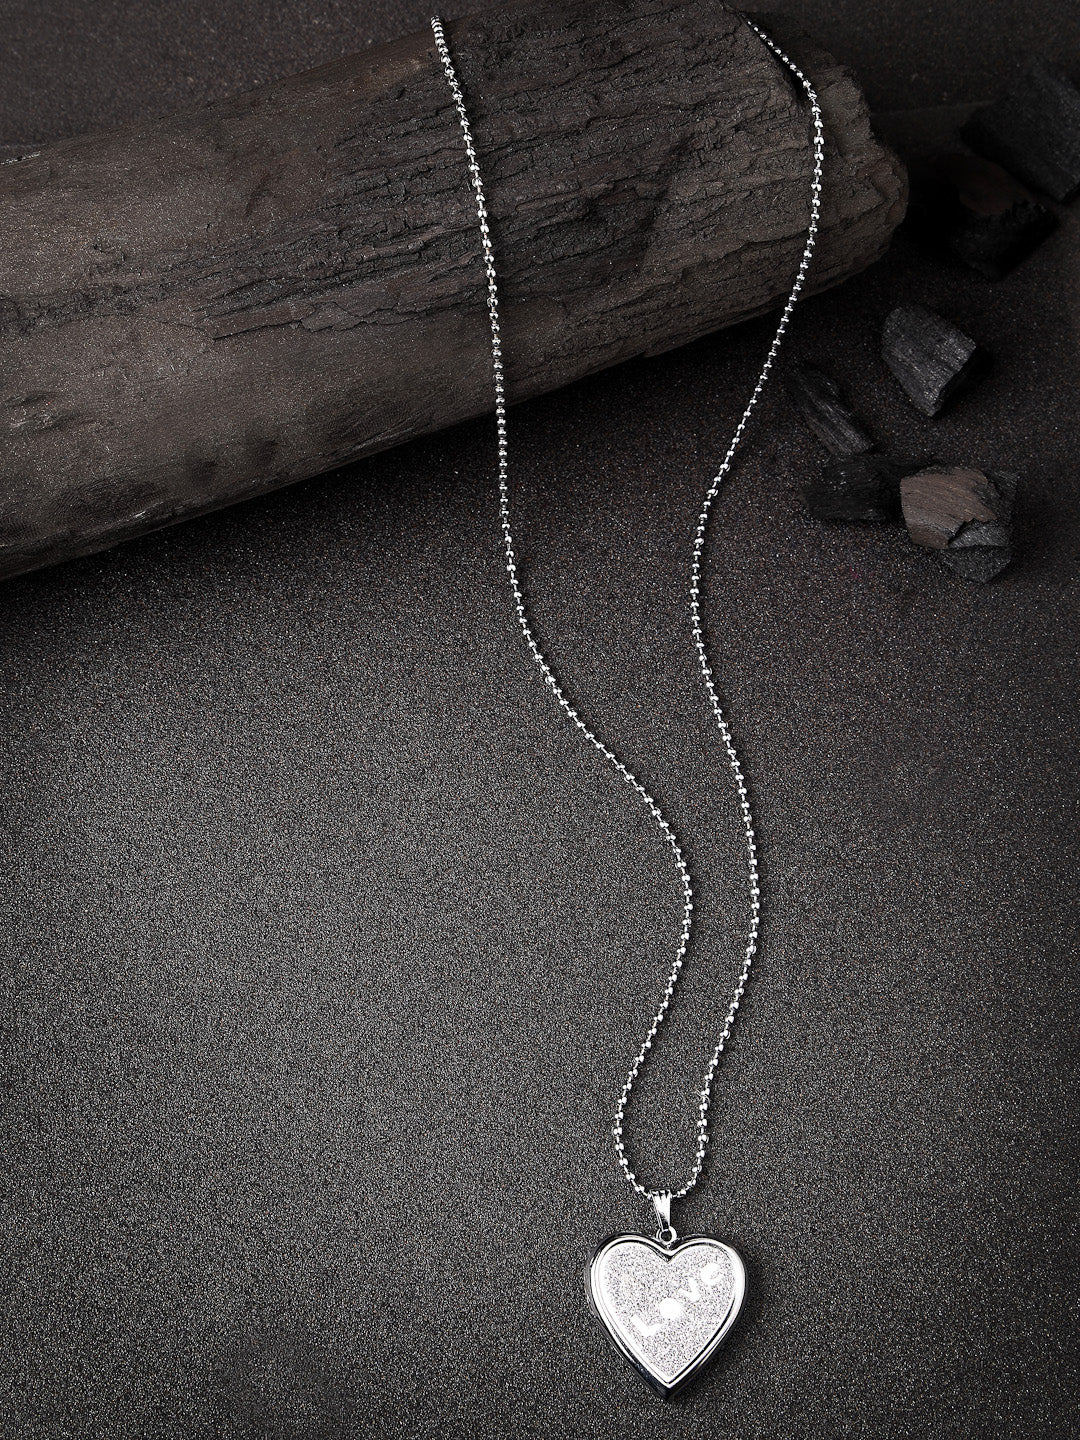 Men's silver plated heart shaped pendent with picture frame and chain - NVR